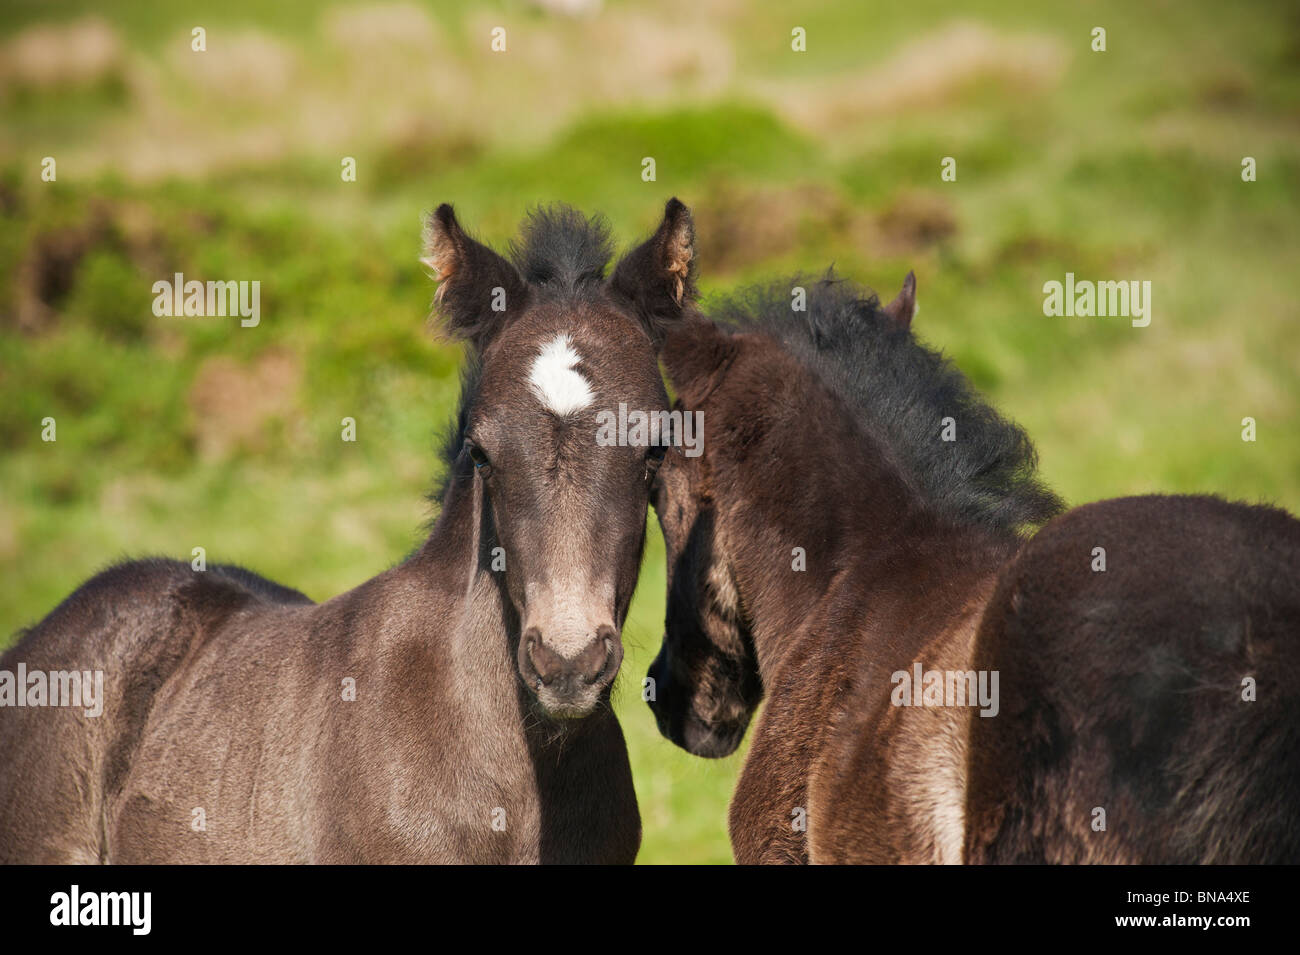 Two Welsh mountain pony foals playing together, Hay Bluff, Wales Stock Photo